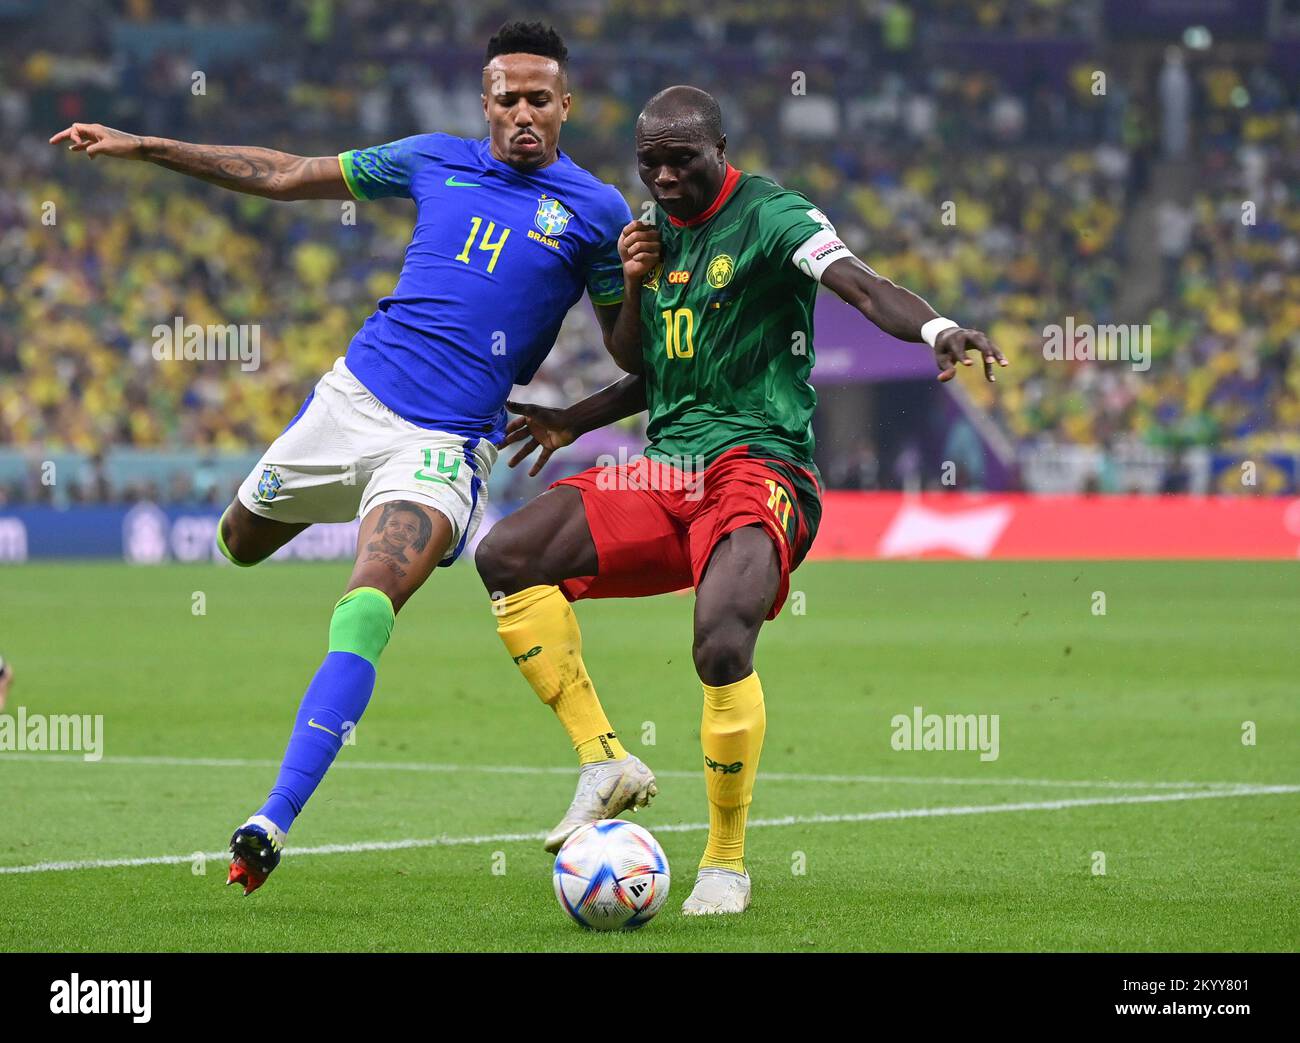 Lusail, Qatar. 2nd Dec, 2022. Eder Militao of Brazil vies with Vincent Aboubakar of Cameroon during their Group G match at the 2022 FIFA World Cup at Lusail Stadium in Lusail, Qatar, Dec. 2, 2022. Credit: Chen Cheng/Xinhua/Alamy Live News Stock Photo